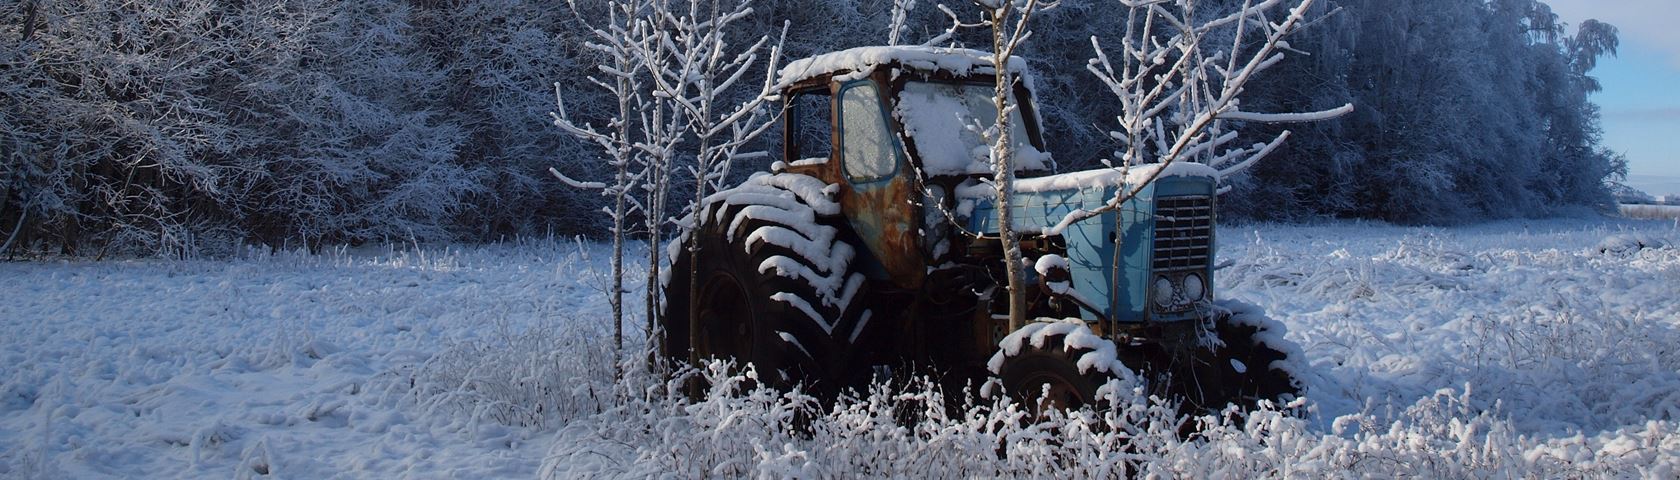 Old Tractor in the Snow • Image • WallpaperFusion by Binary Fortress Software